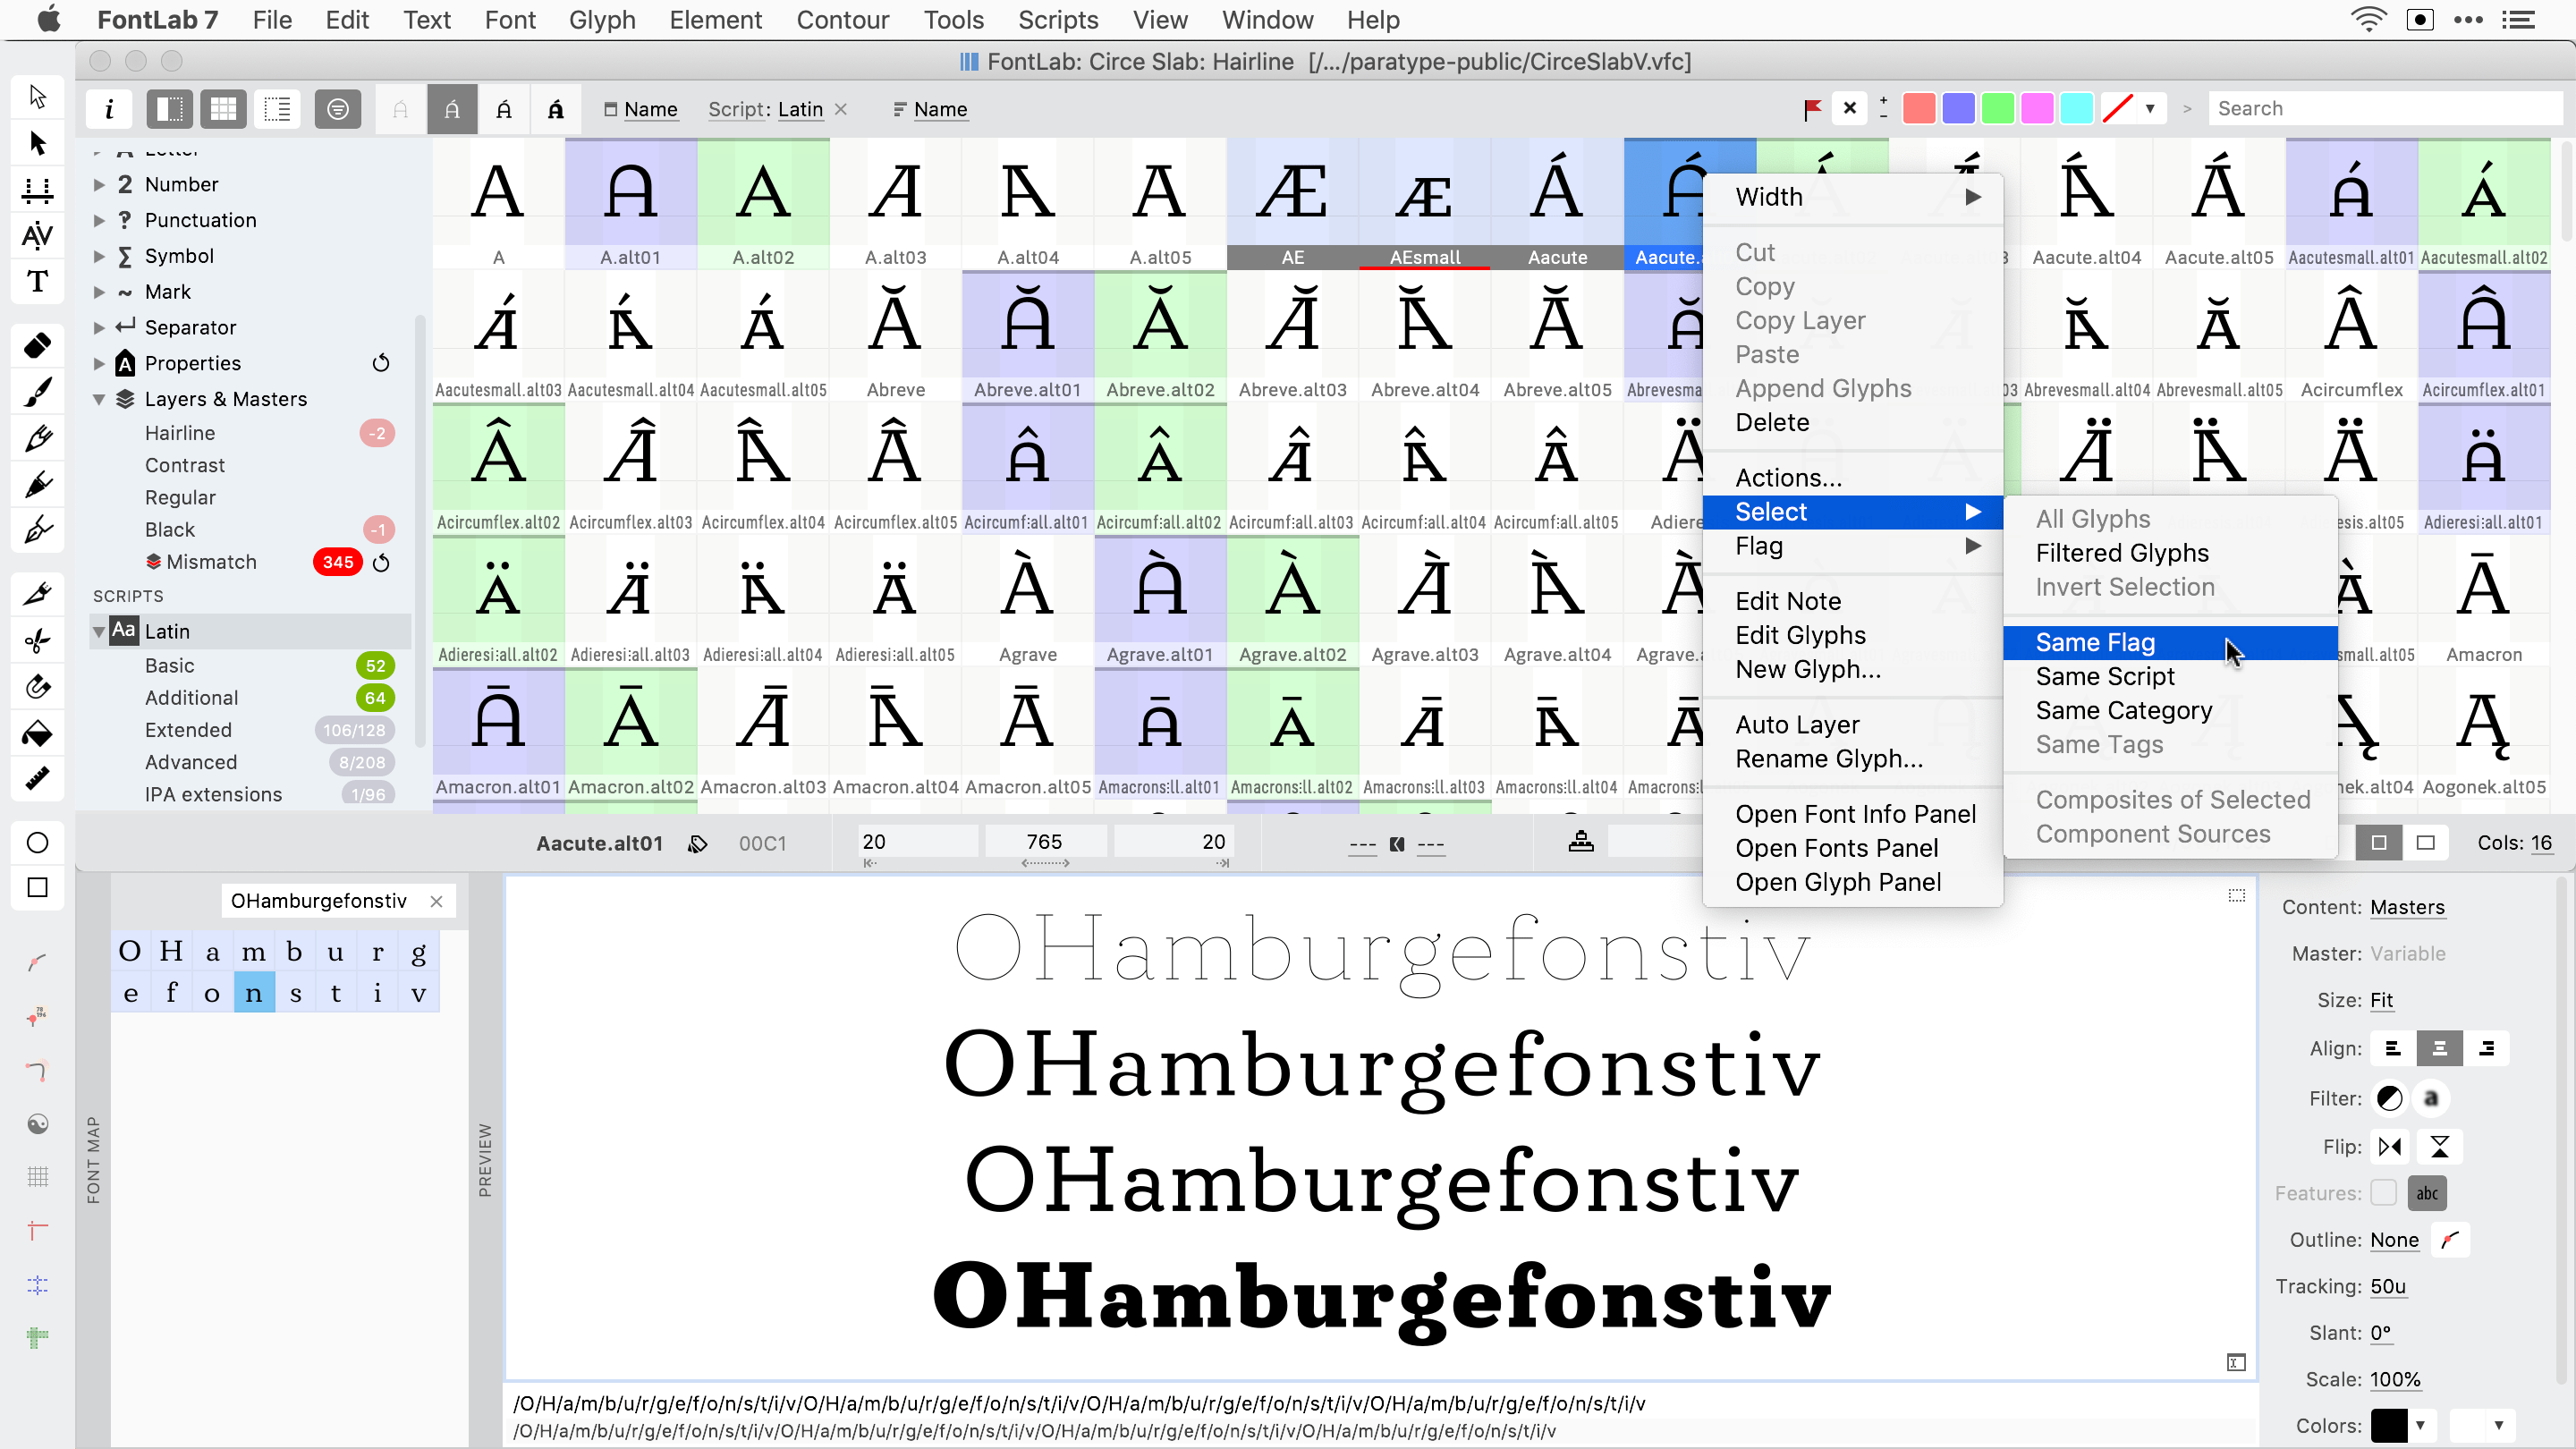 FontLab 7.1.1: Multiple masters in Preview panel, Font window selection, Layers totals